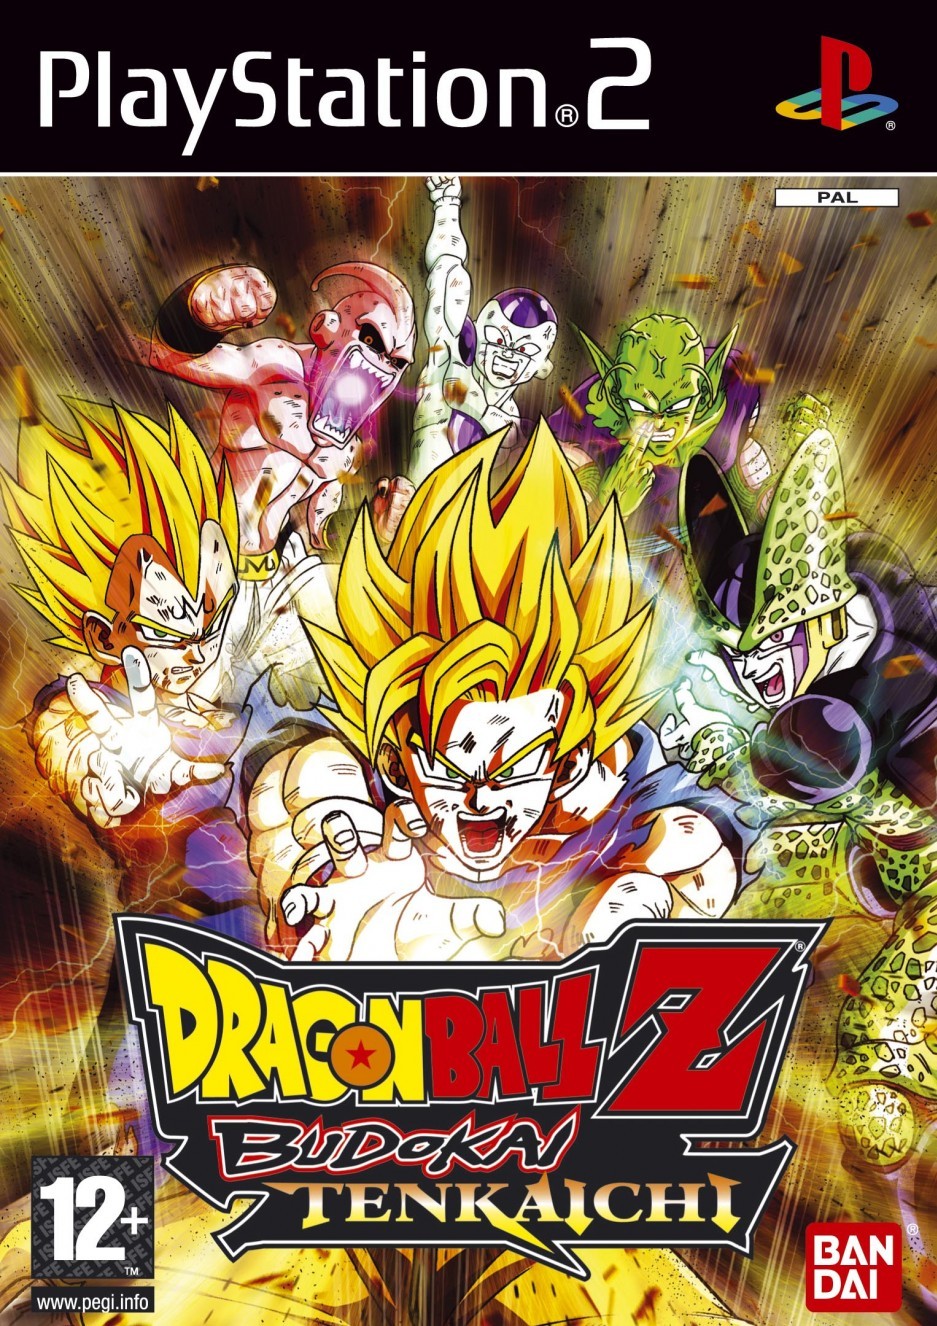 How Many Characters Are In Dragon Ball Z Budokai 3